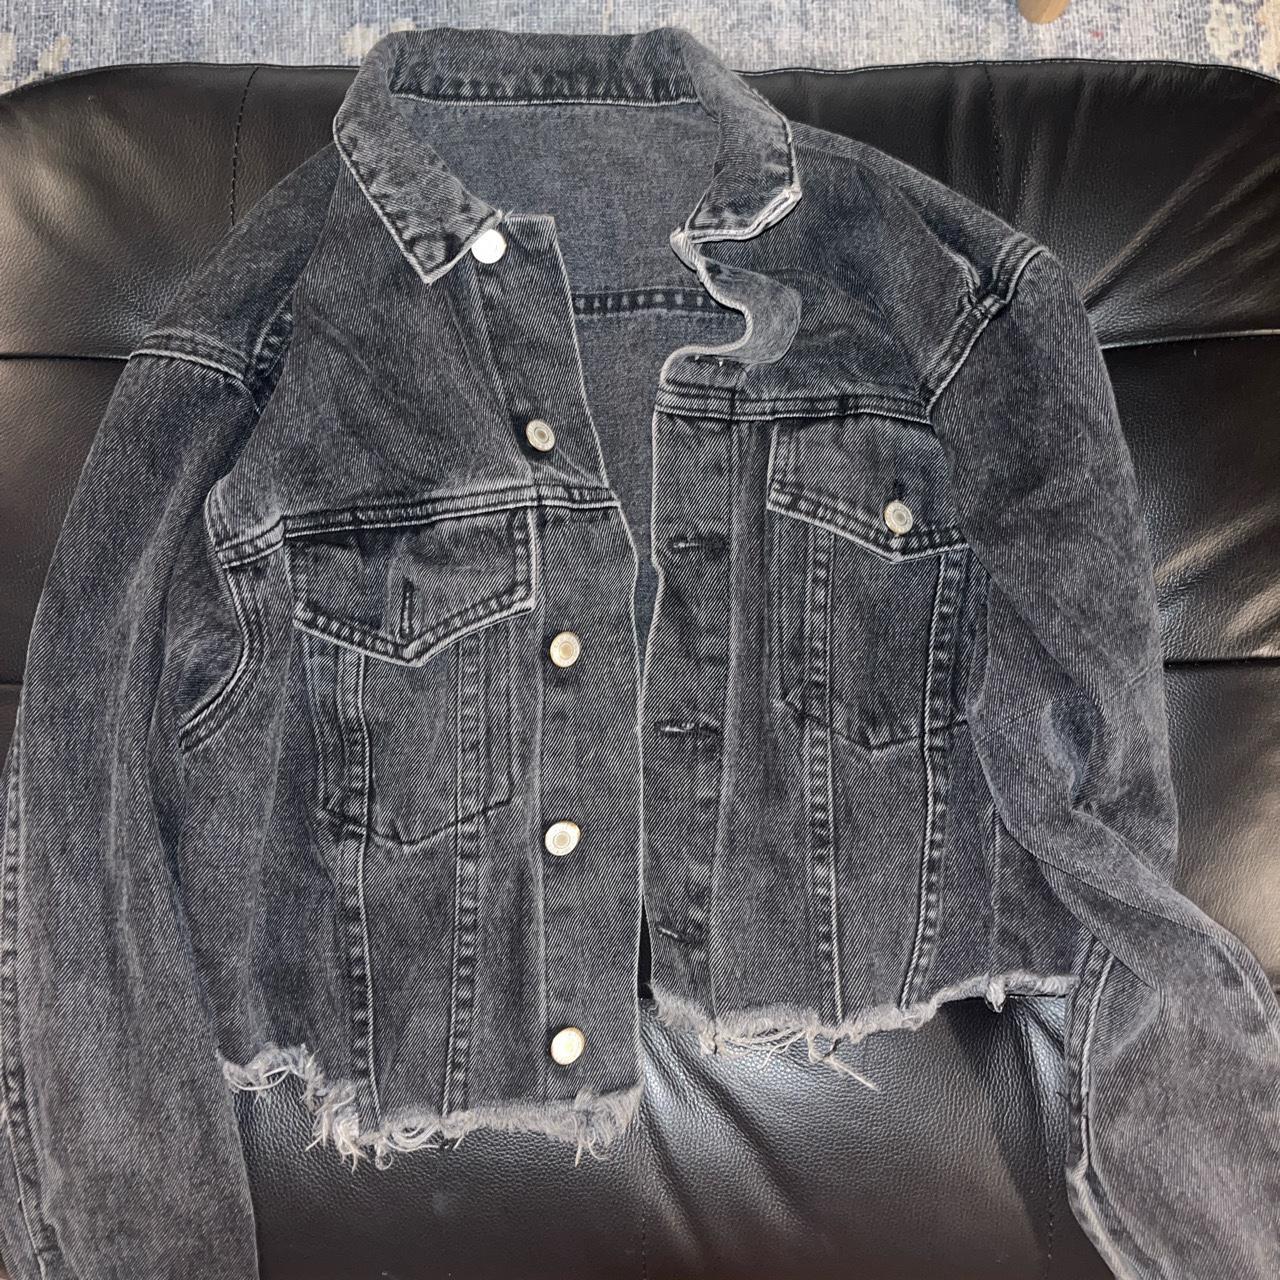 Denim jacket - Women's Clothing Online Made in Italy